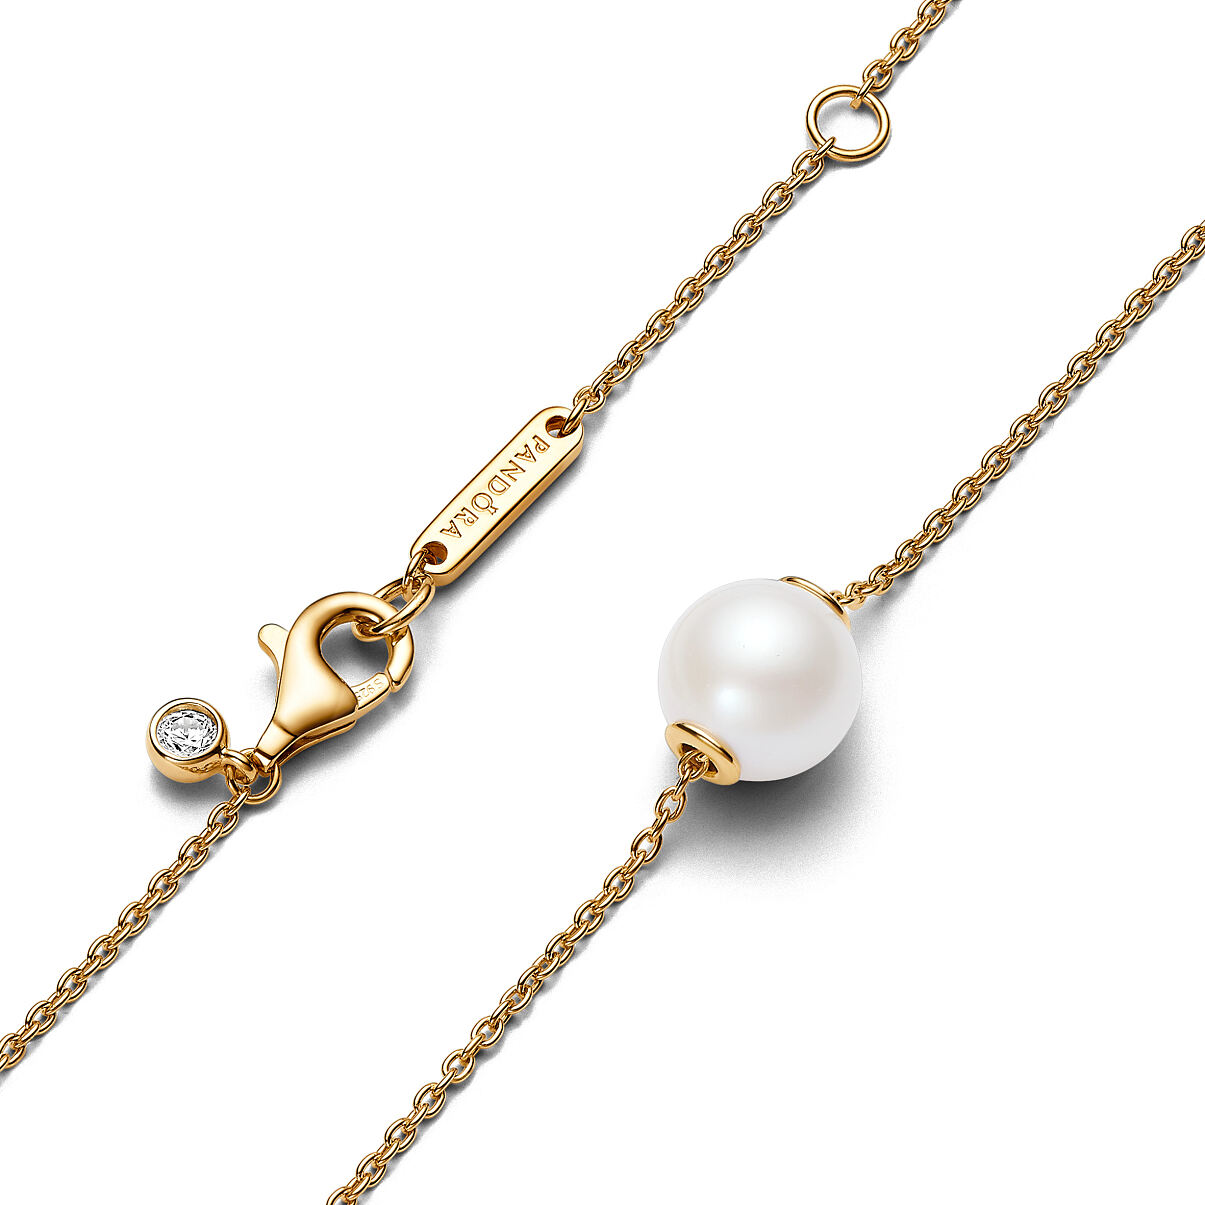 Pandora_Necklace_14k Gold-plated_Freshwater Pearls_Cubic Zirconia_363167C01_179,00 Euro (3)